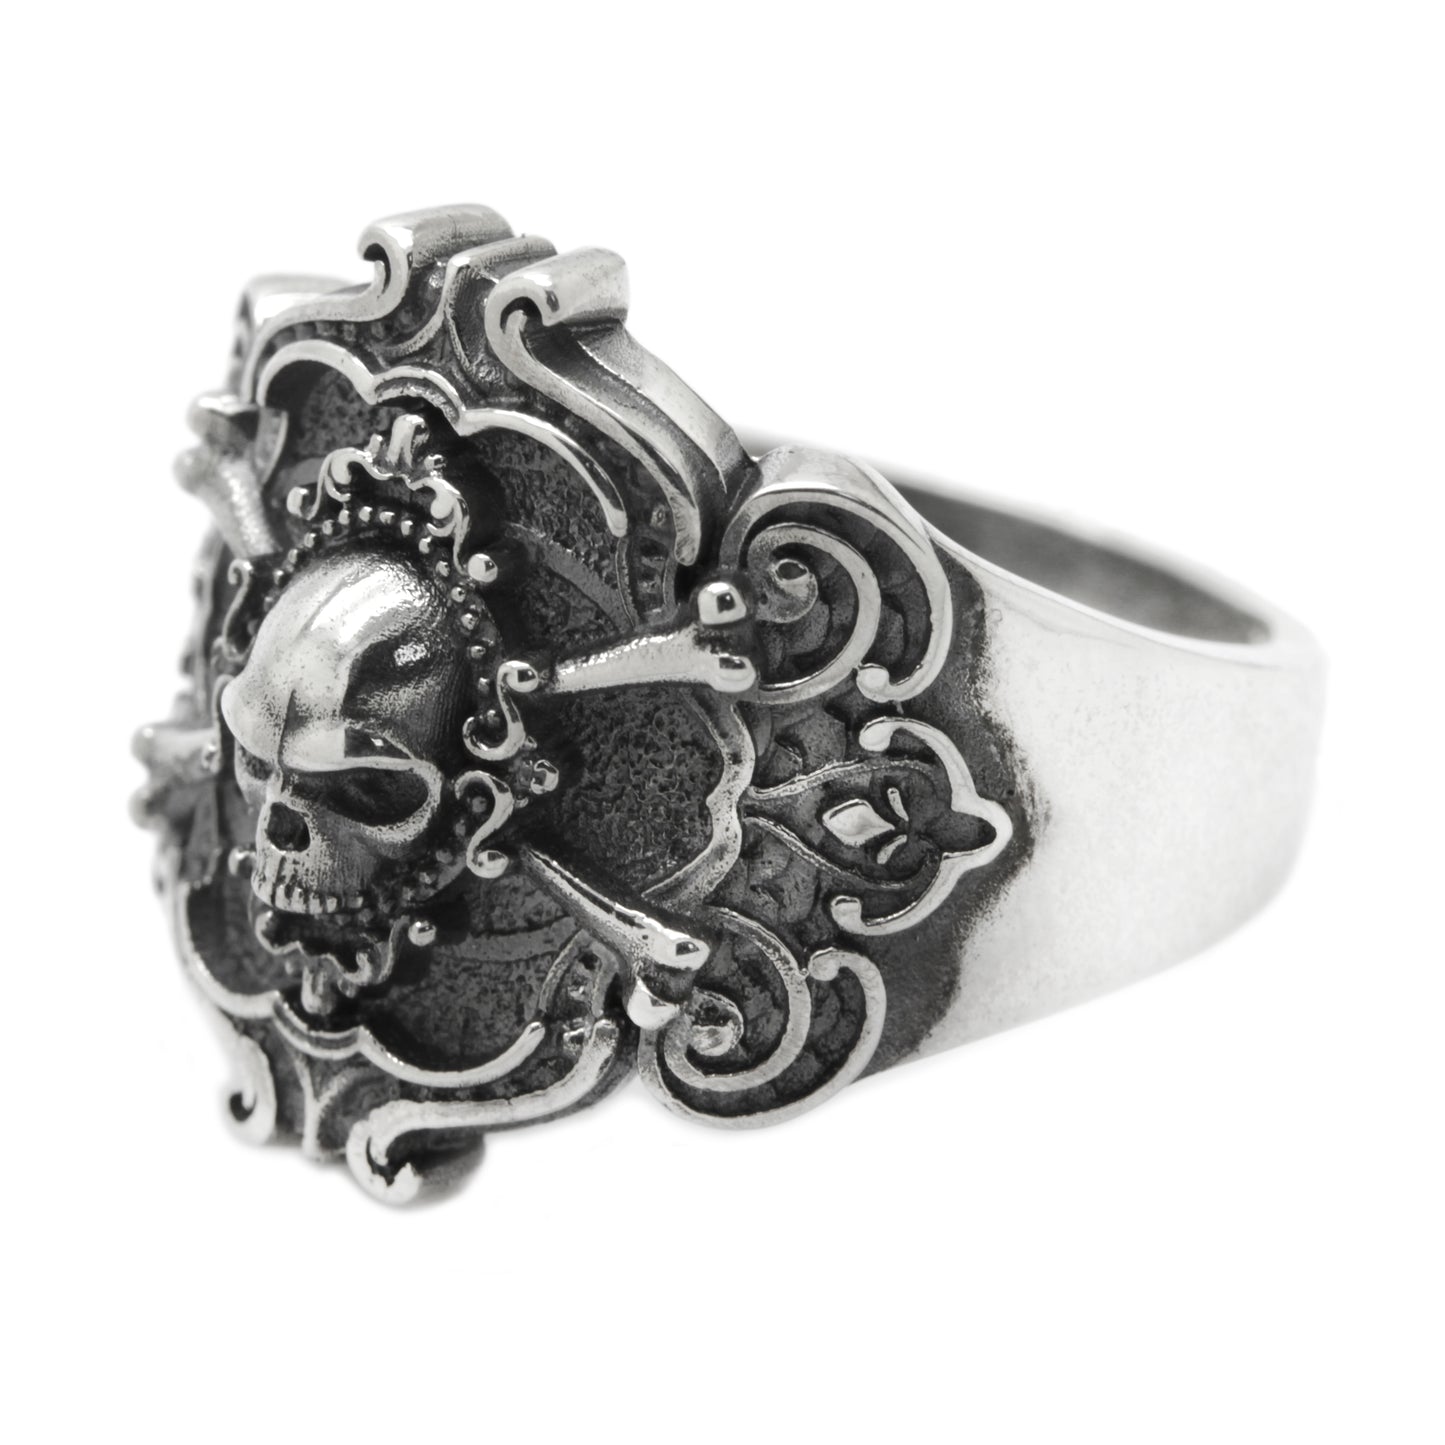 Beautiful Pirate Skull and Crossbones Mens Sterling Silver Ring